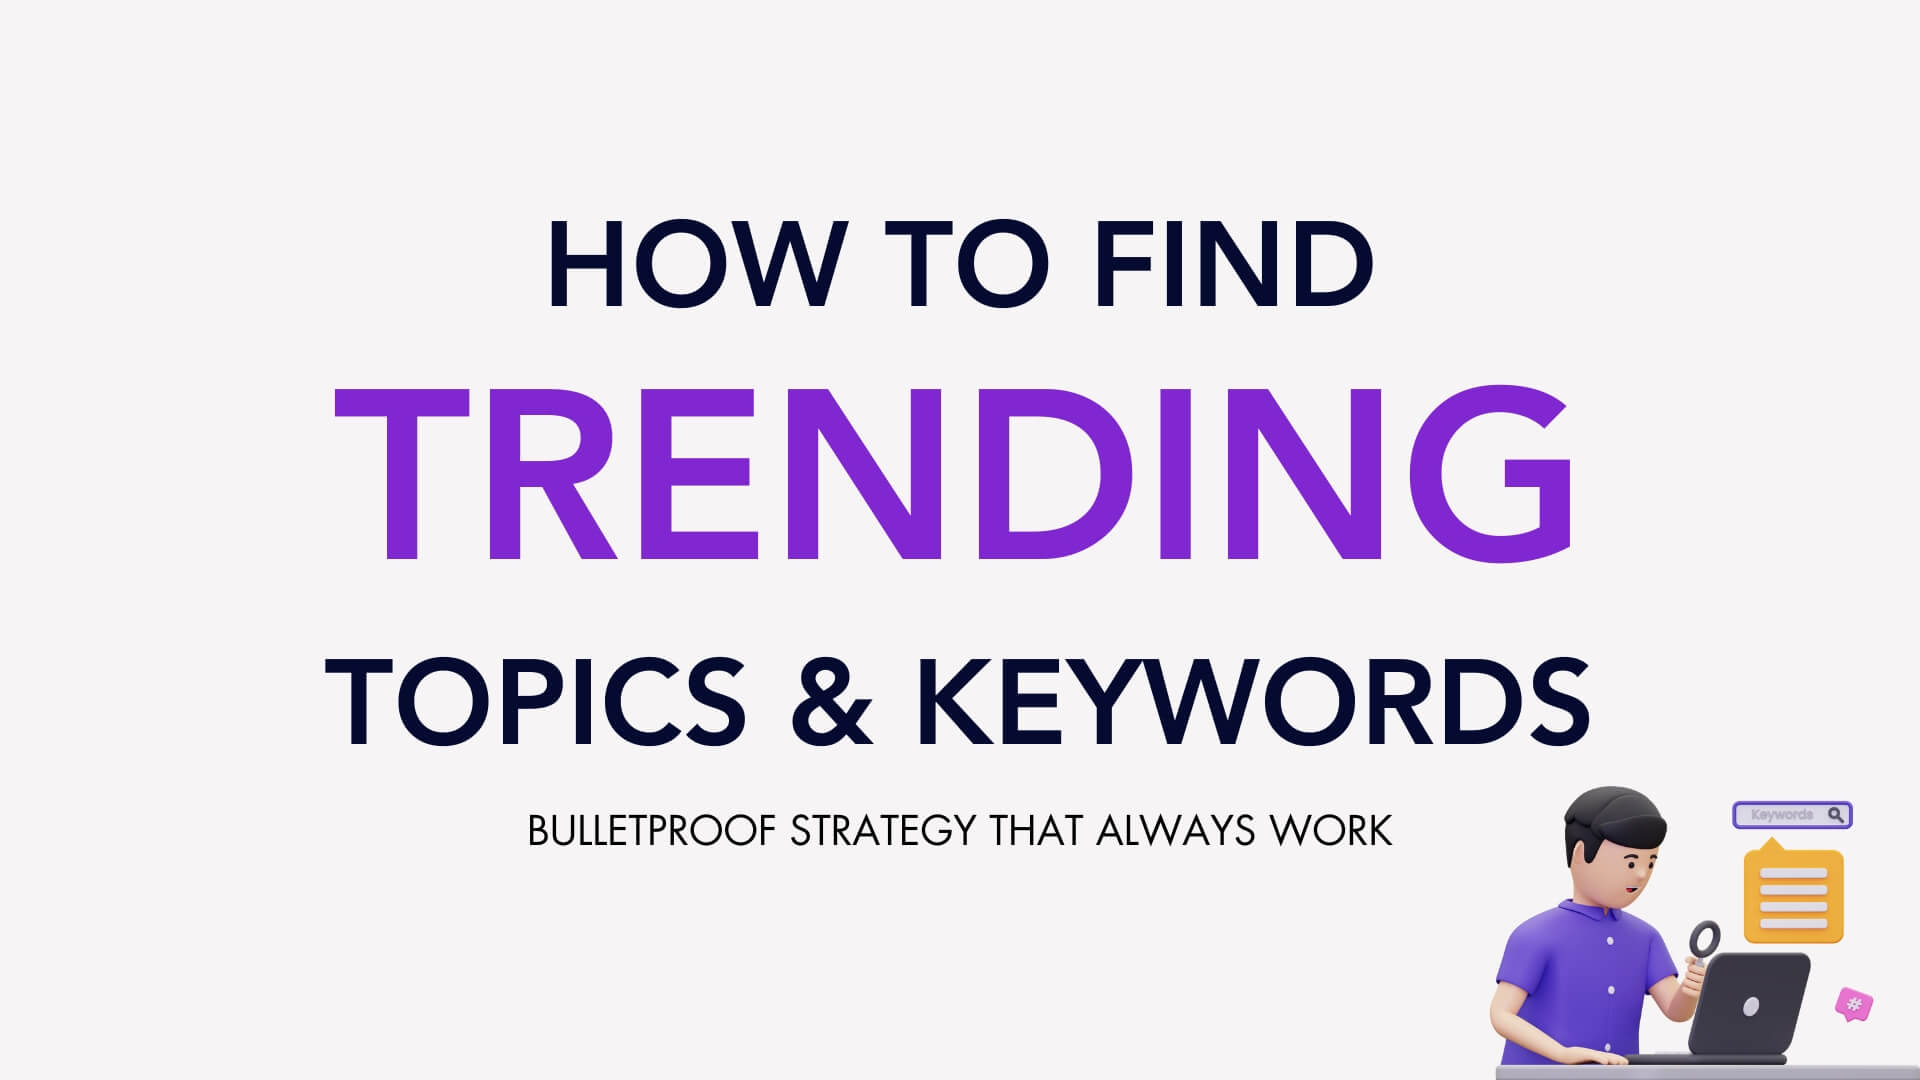 How to Find Trending Topics & Keywords to Blog About (My Bulletproof Strategy)